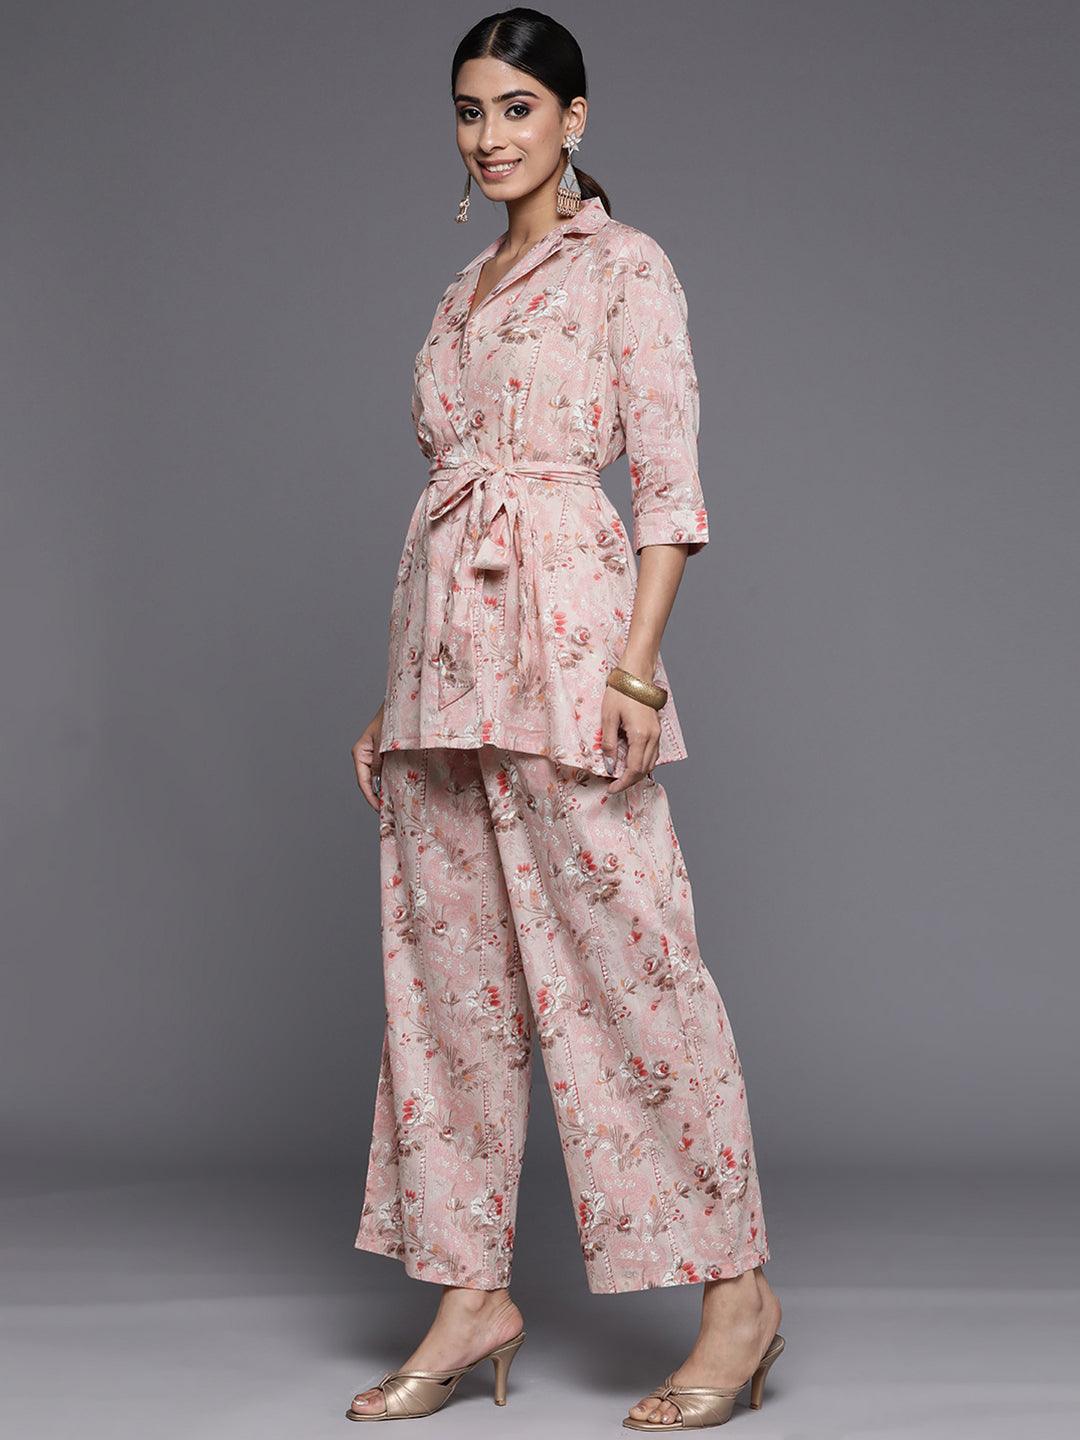 Peach Printed Cotton Shirt With Palazzos